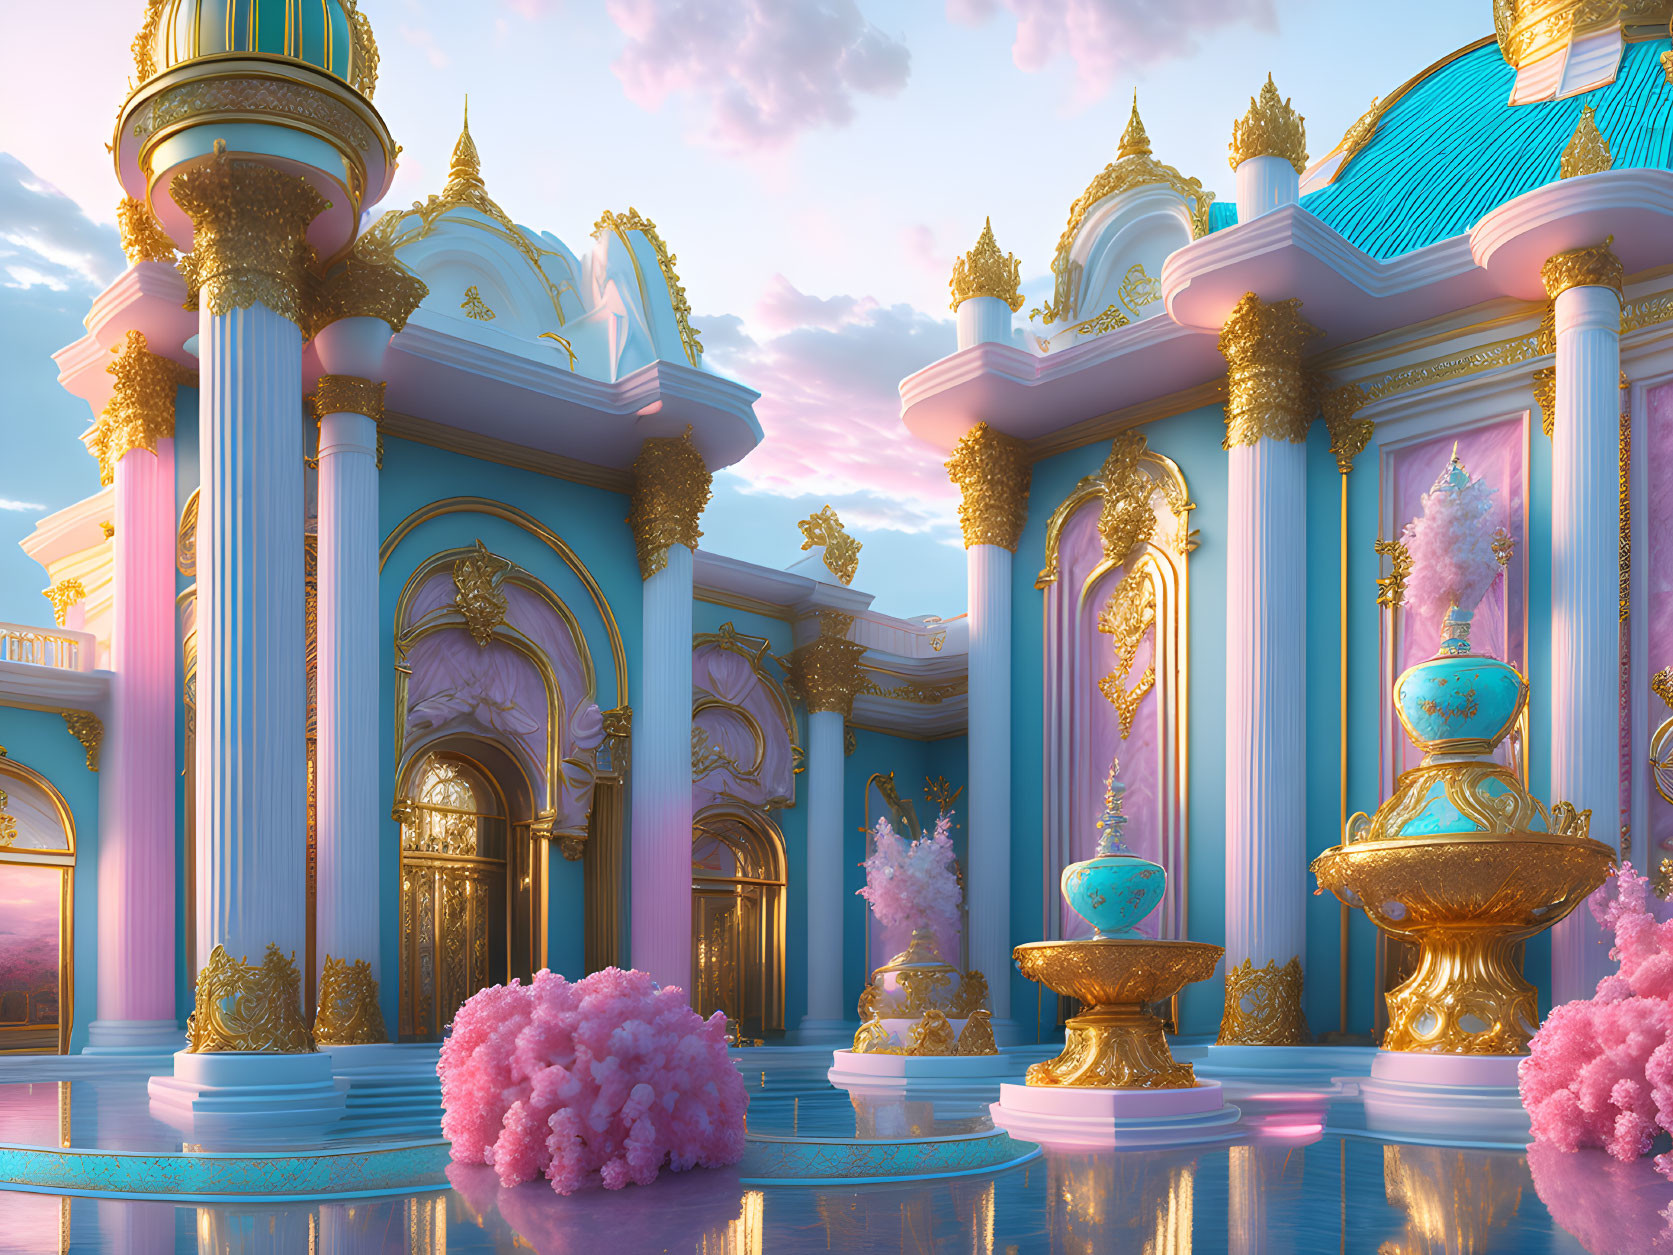 Opulent Golden and Blue Palace with Ornate Pillars and Pink Flora